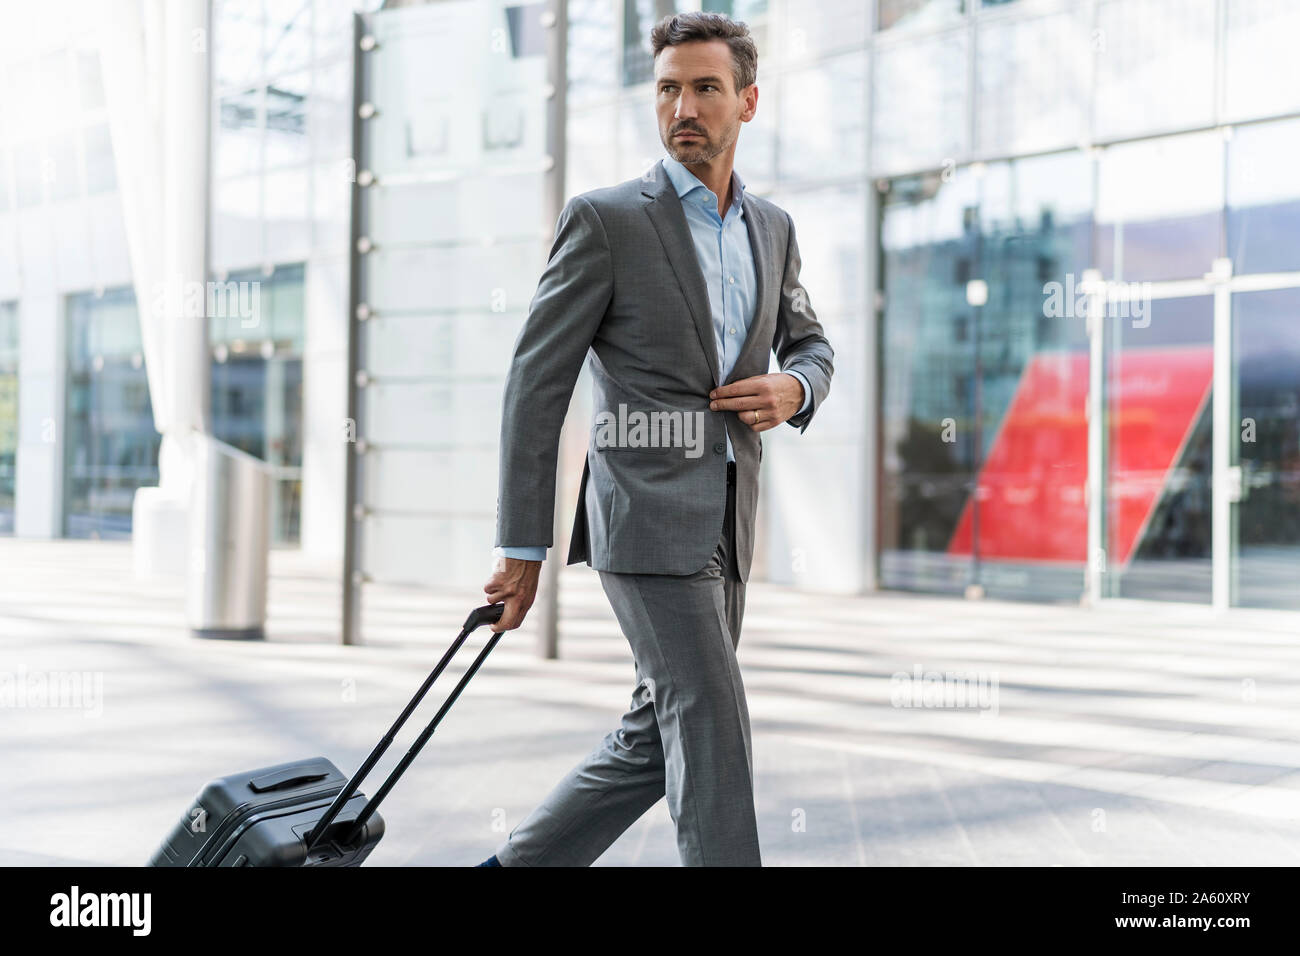 Businessman with baggage on the go Stock Photo